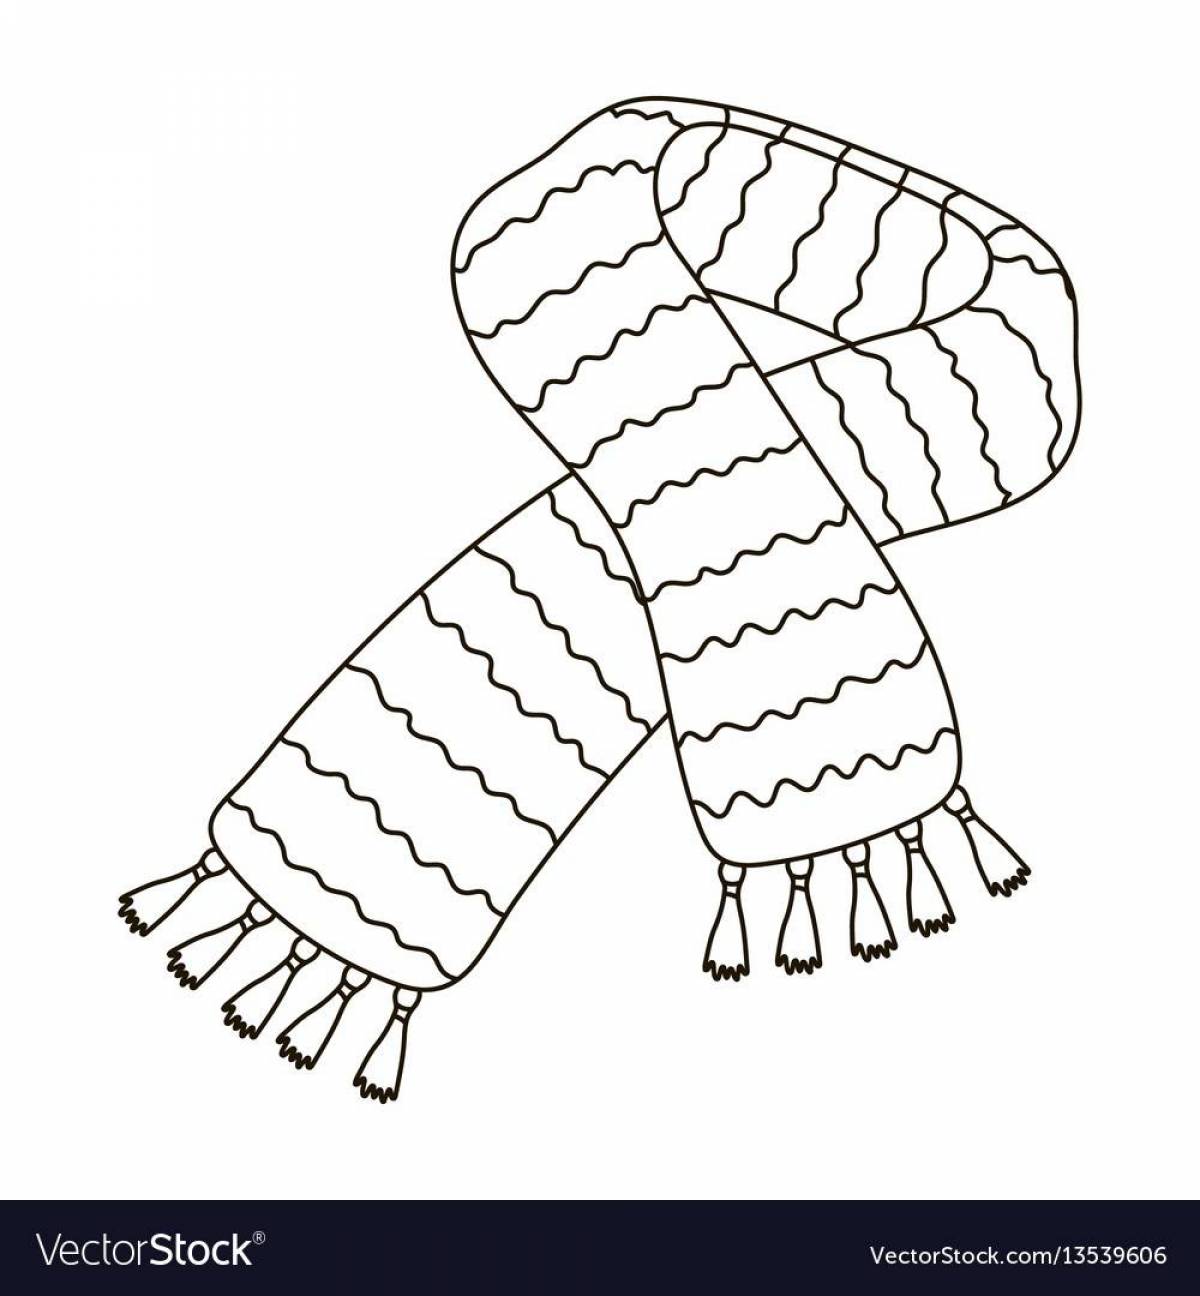 Glittering scarf coloring page for kids